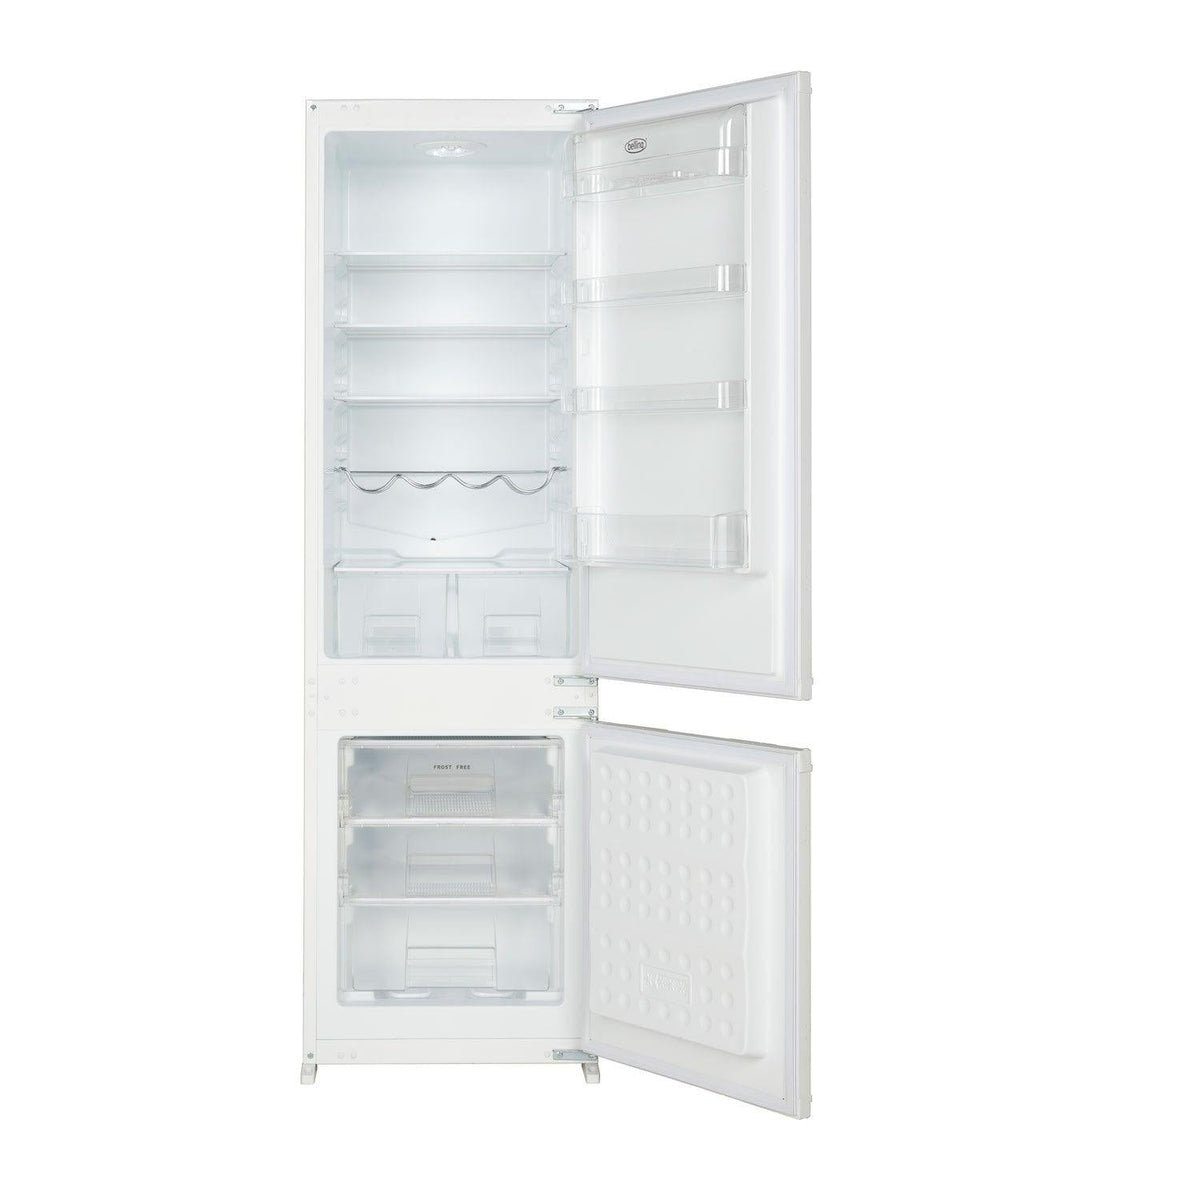 Belling 70/30 Frost Free Built-In Fridge Freezer - White | BIFF7030E from DID Electrical - guaranteed Irish, guaranteed quality service. (6890768629948)